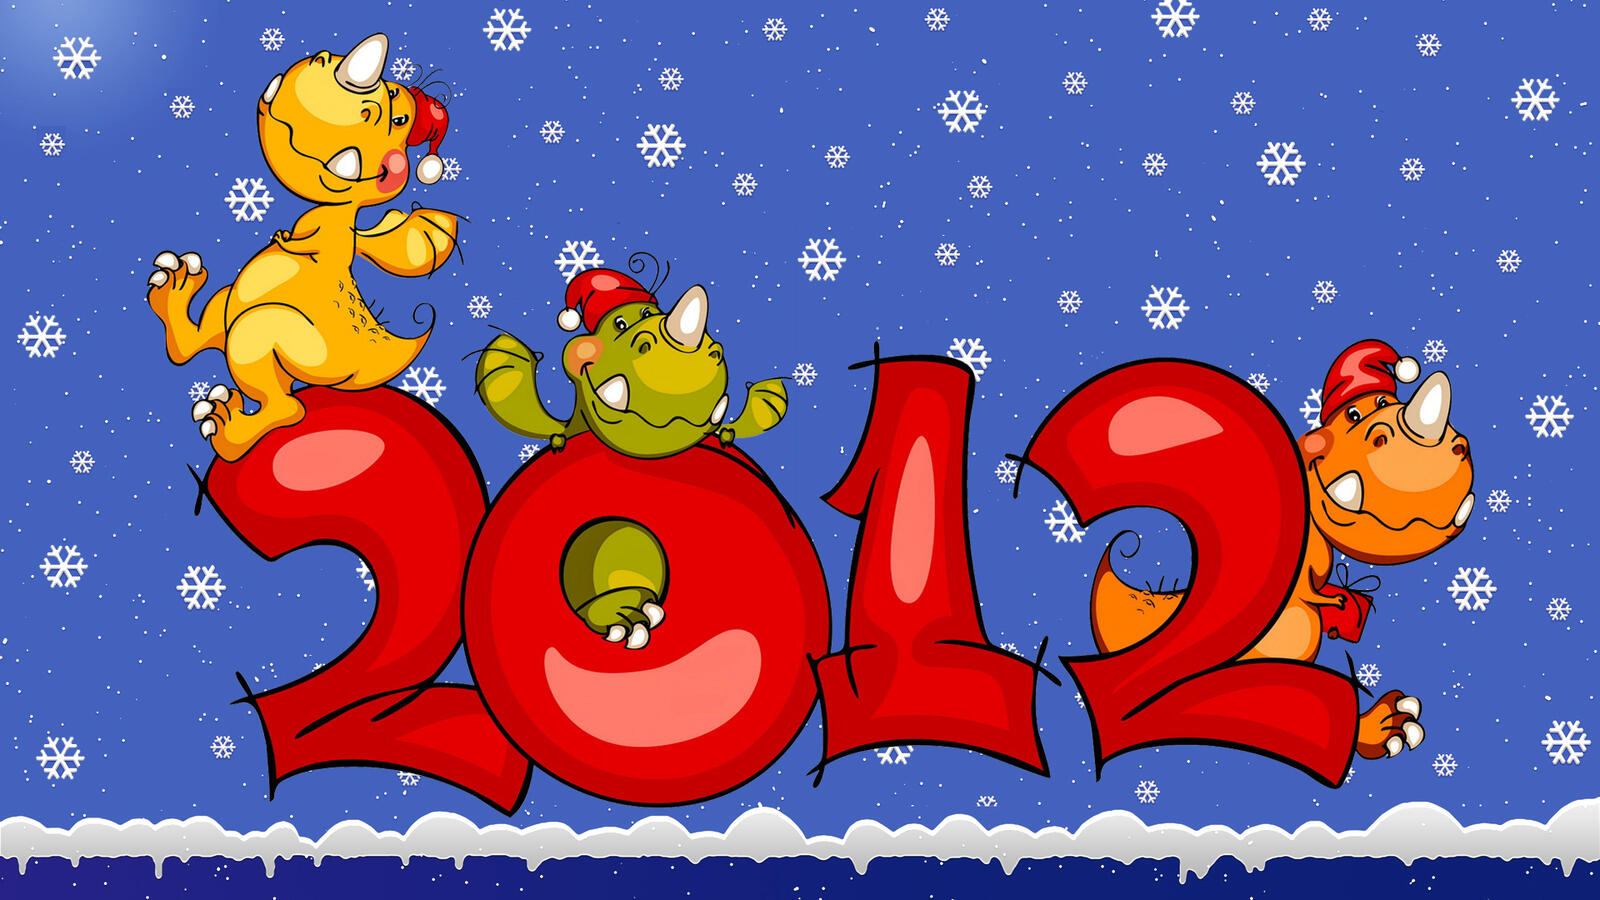 Wallpapers 2012 new year dragons on the desktop